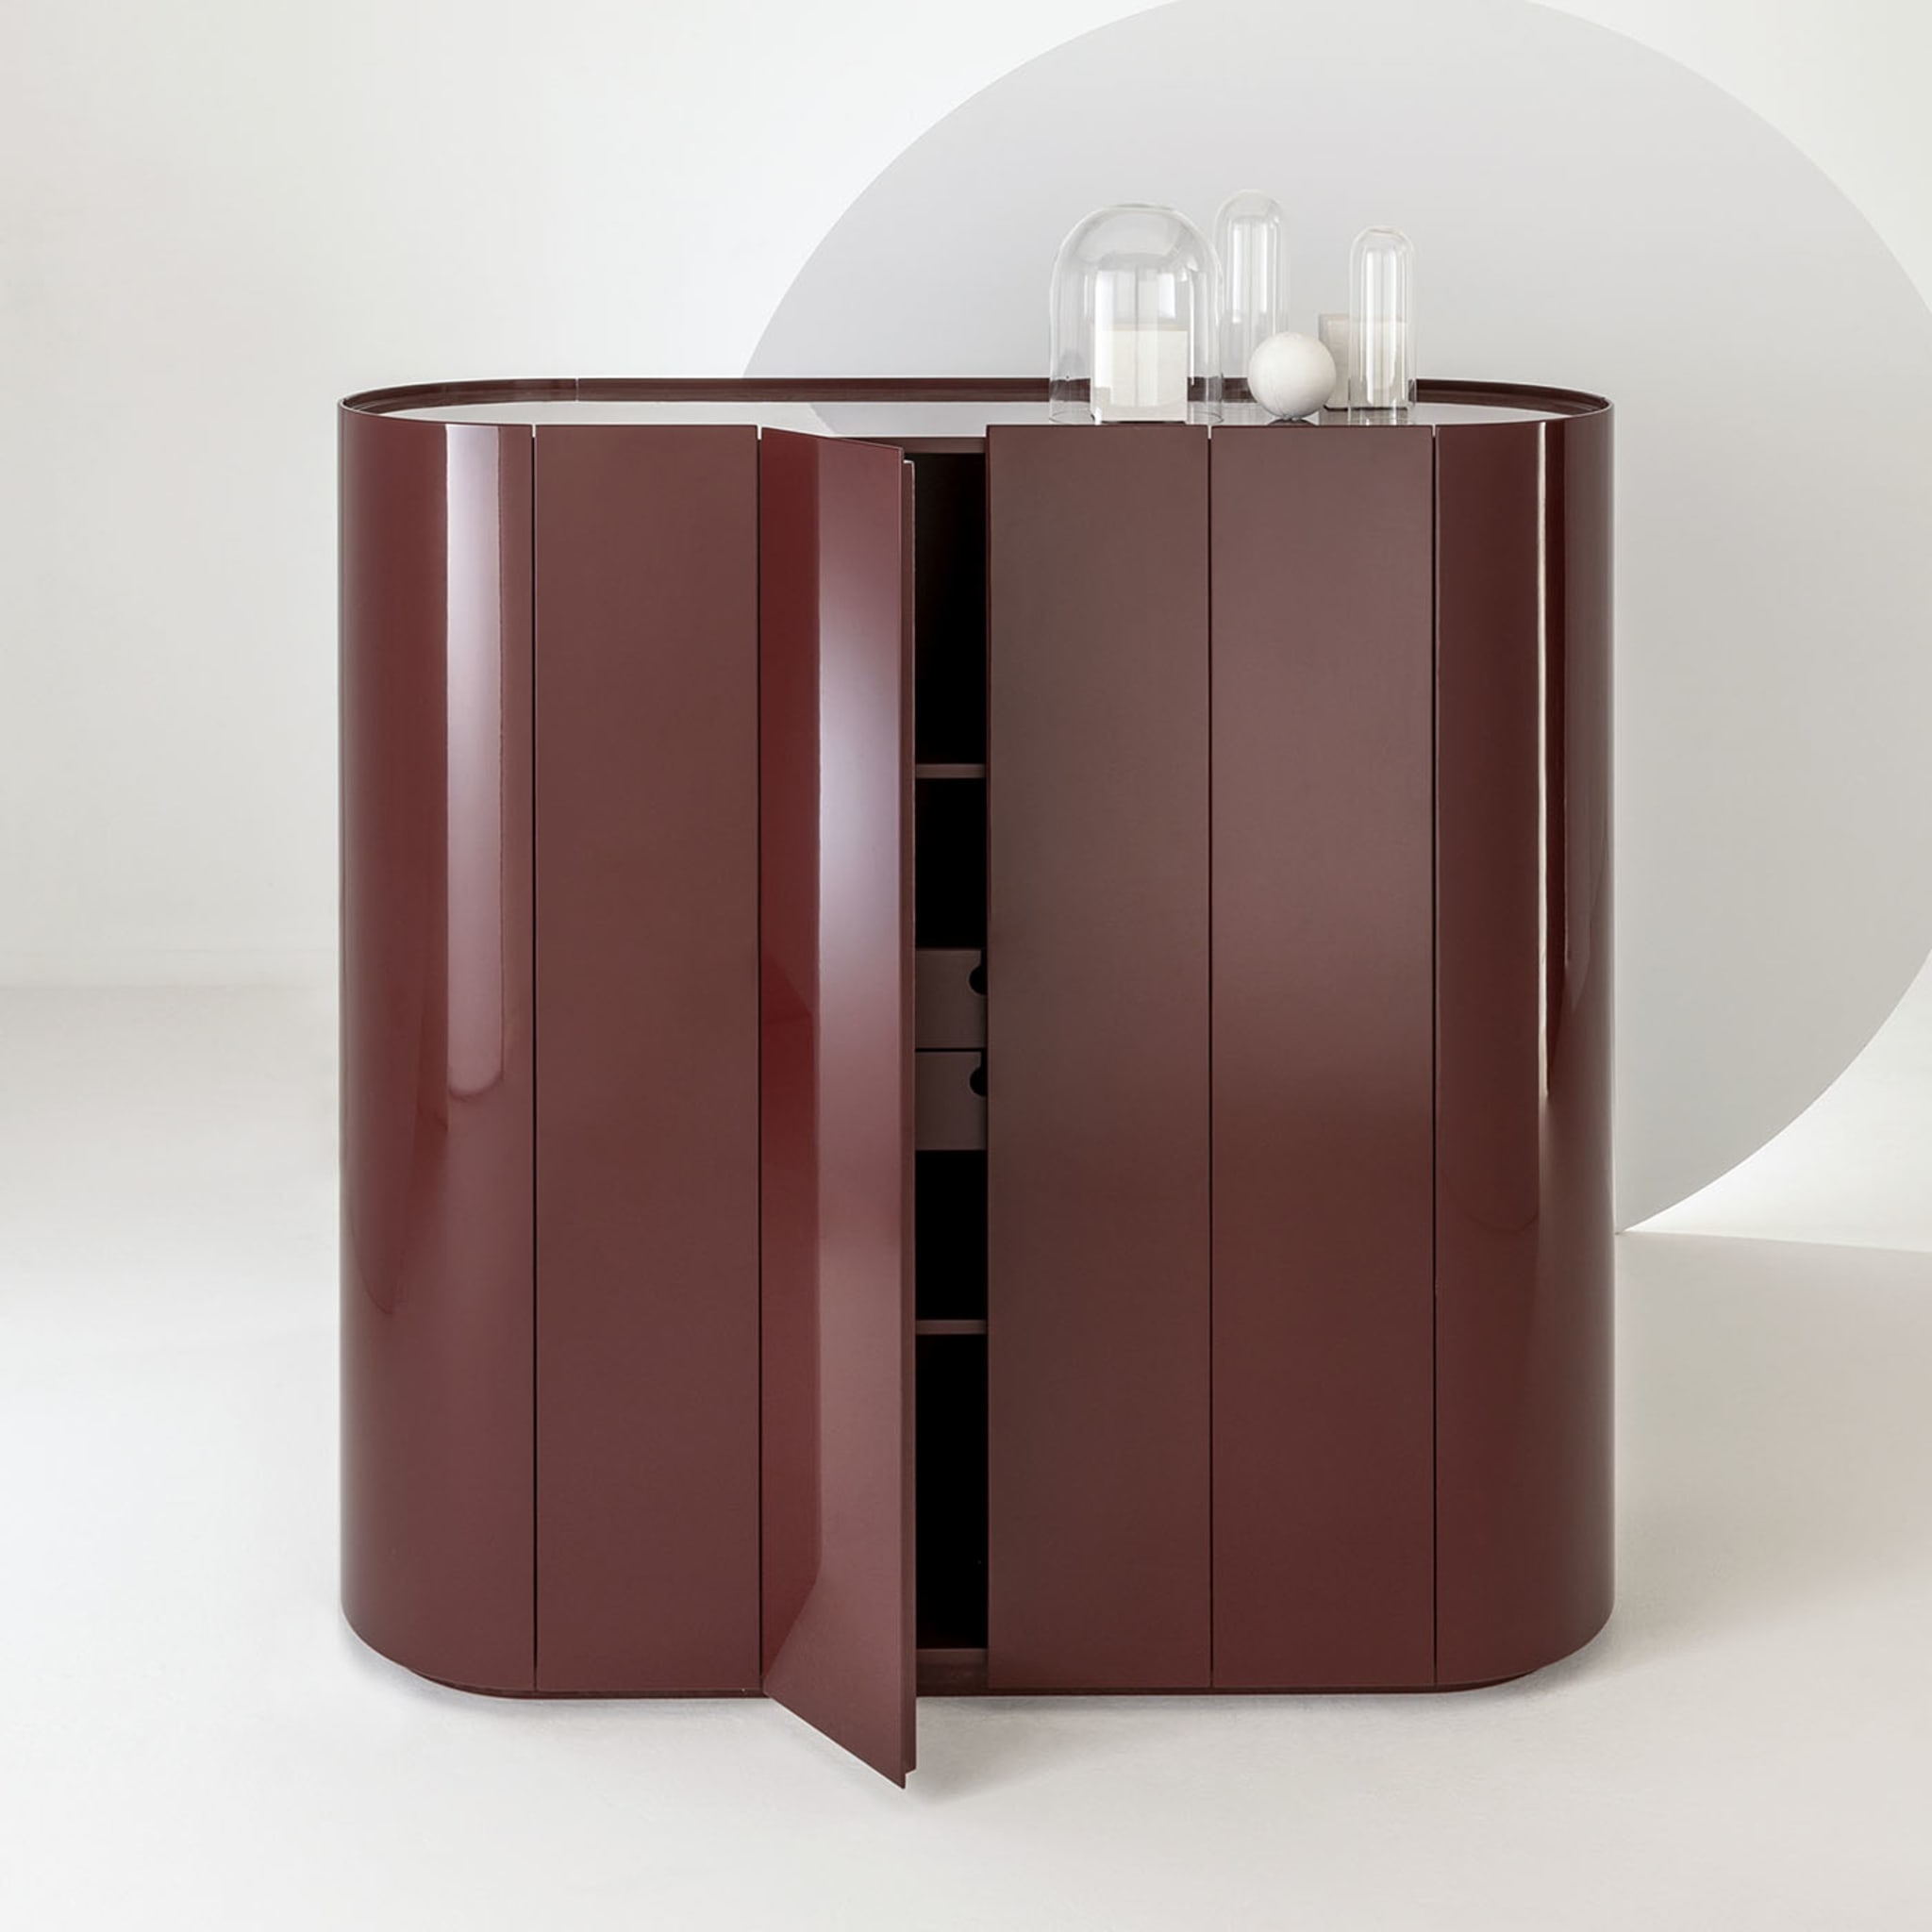 6-Door Medium Glossy Red-Lacquered Cabinet - Alternative view 1